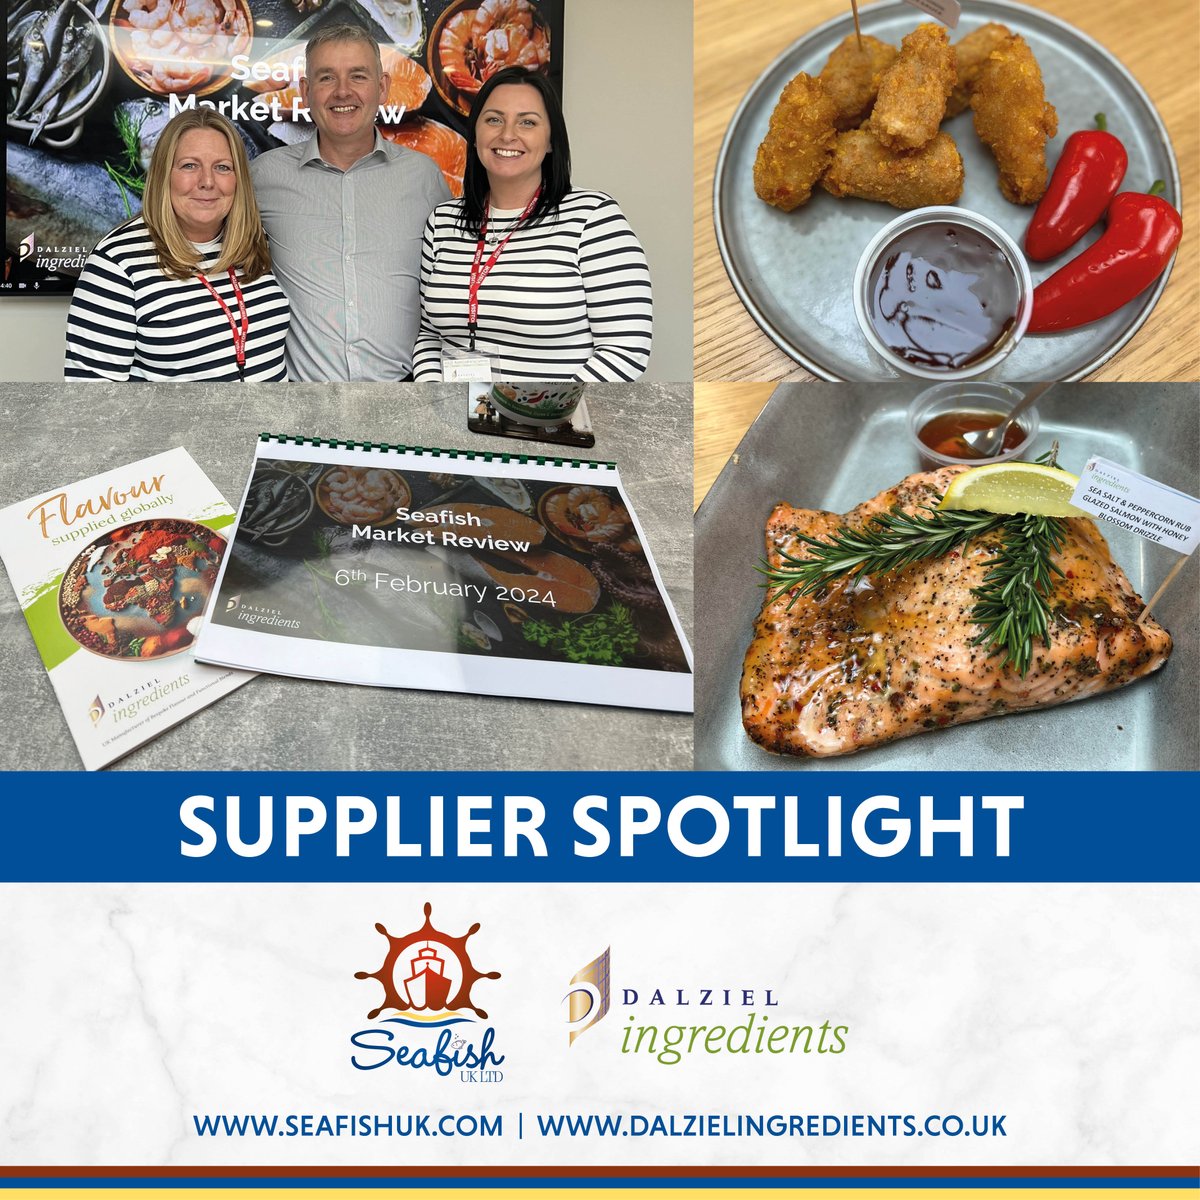 We had a fantastic meeting recently with our long-time partner Dalziel Ingredients about the latest market trends, up and coming flavour profiles and all new, innovative seasonings and products set to take the food industry by storm. 🙌

#MarketTrends #SustainableSourcing